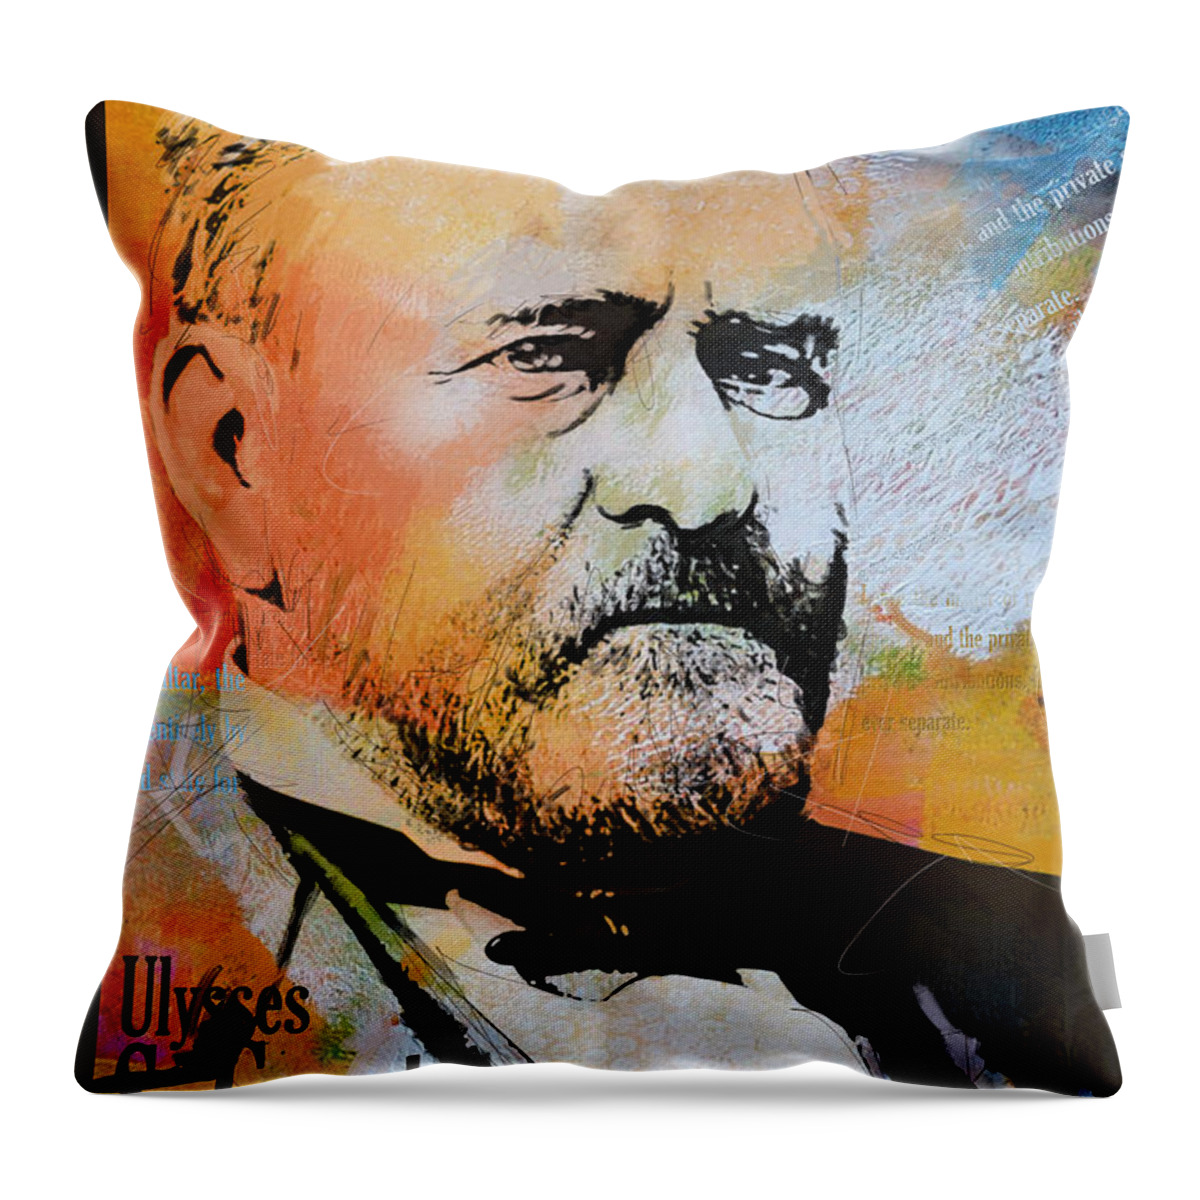 Ulysses S. Grant Throw Pillow featuring the painting Ulysses S. Grant by Corporate Art Task Force